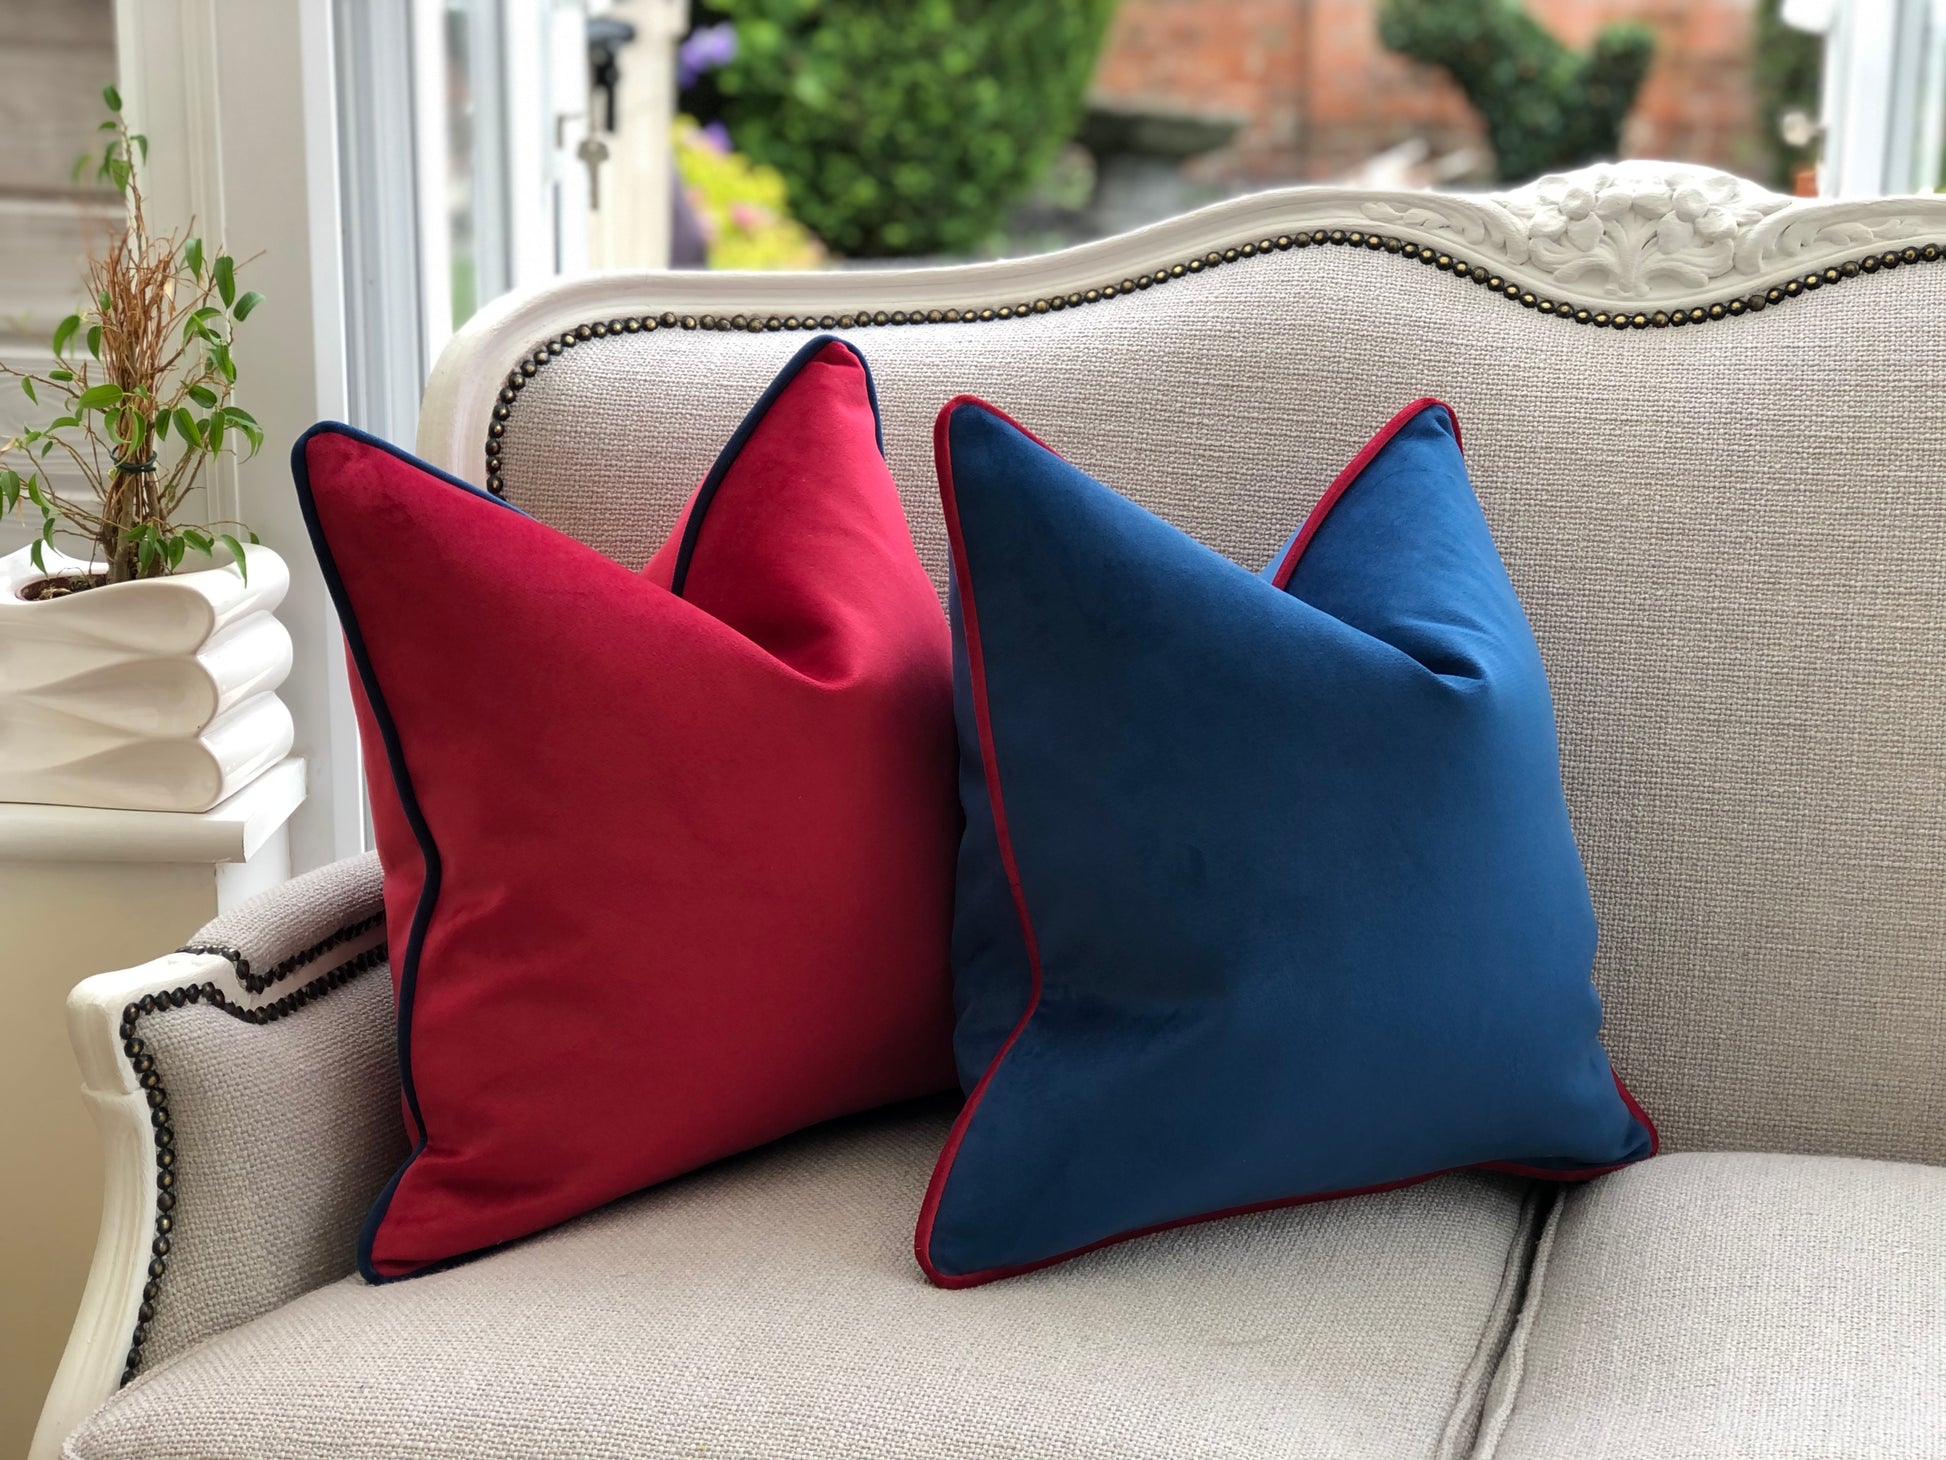 blue cushion with red piping